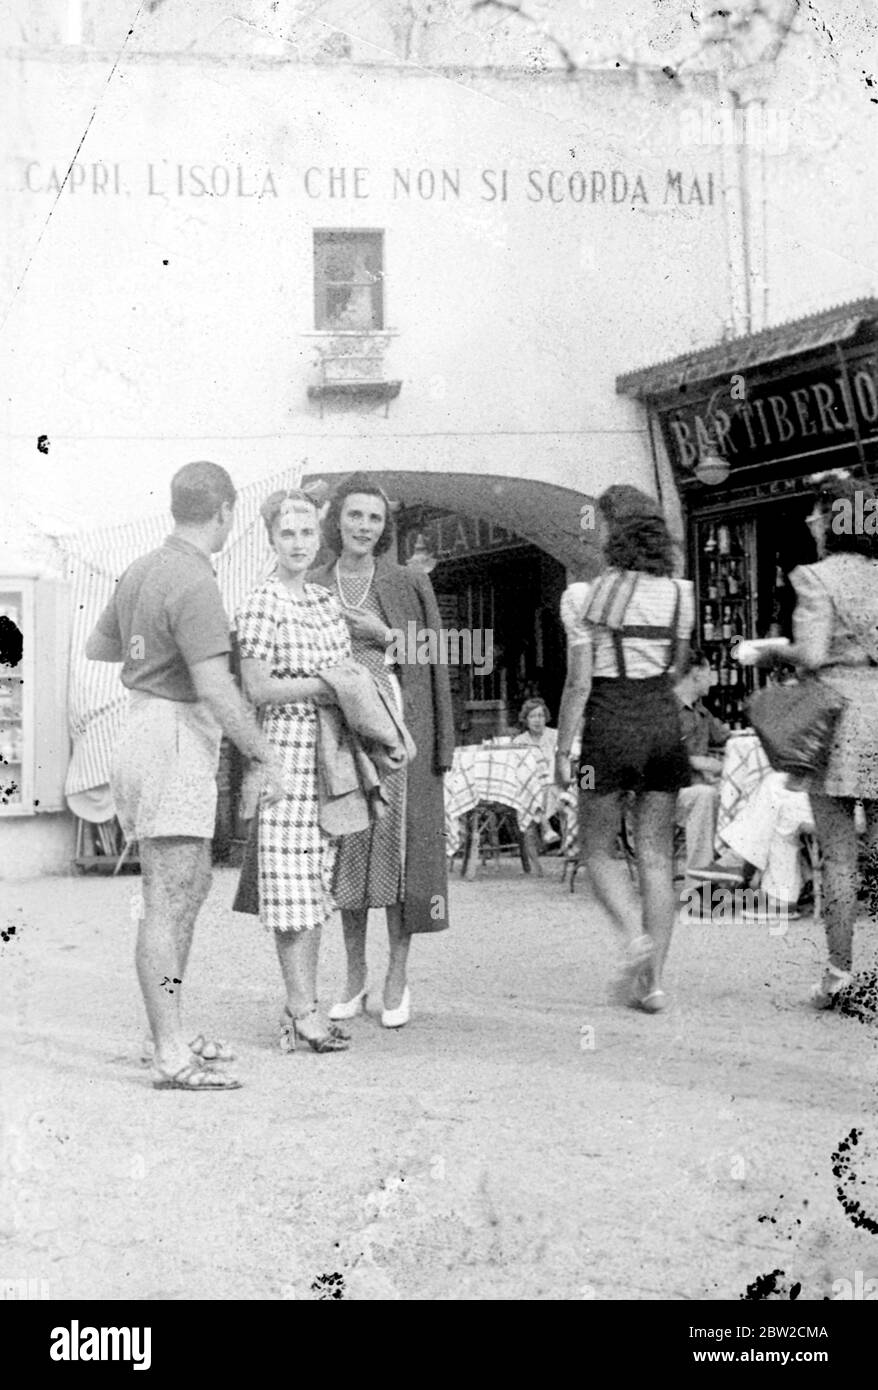 Because of the war danger, in which Italy, is concerned, Countess Haugwitz Reventlow formerly Barbara Hutton, the Woolworth heiress, has left the Isle of Capri, where she has been on holiday. The Countess (centre) with Prince of Sirignano of Naples and Mrs Kennerley on her departure from Capri. 26 August 1939 Stock Photo